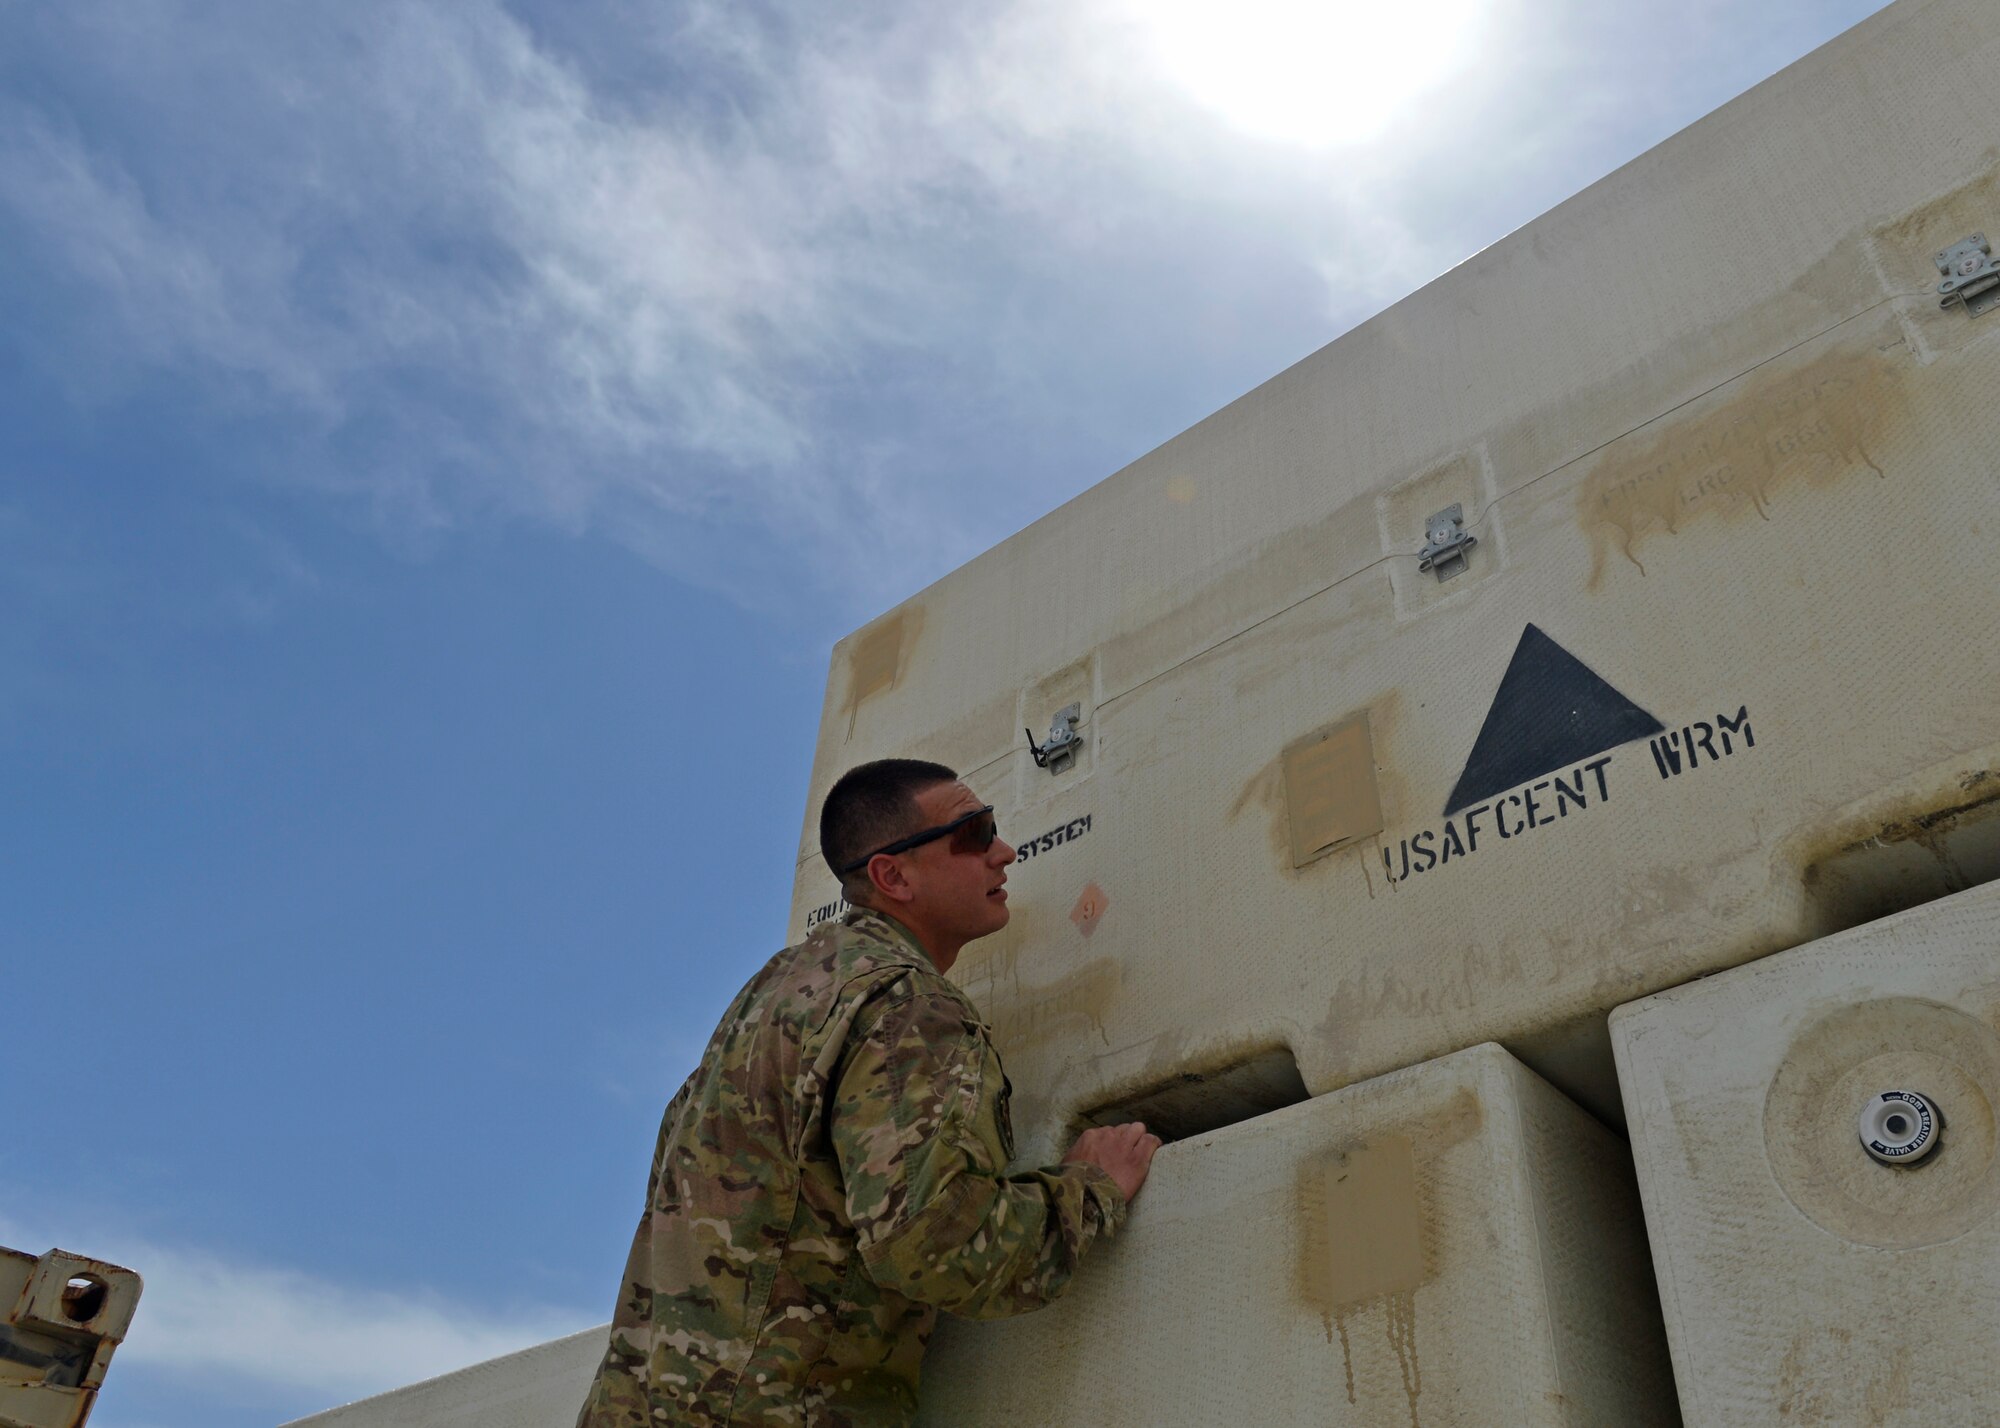 Staff Sgt. Anthony Vasquez, 455th Expeditionary Logistics Readiness Squadron day shift supervisor, identifies equipment containers May 2, 2014 at Bagram Airfield, Afghanistan. Vasquez, as part of Central Command Materiel Recovery Element helps identify, store and redeploy assets to the U.S. or disposing of items located throughout the region. The CMRE team has helped recover more than 60 pieces of equipment worth $1.66 million within the last eight months. Vasquez is a native of El Paso, Texas and is deployed from Travis Air Force Base, Calif. (U.S. Air Force by Staff Sgt. Evelyn Chavez/Released)